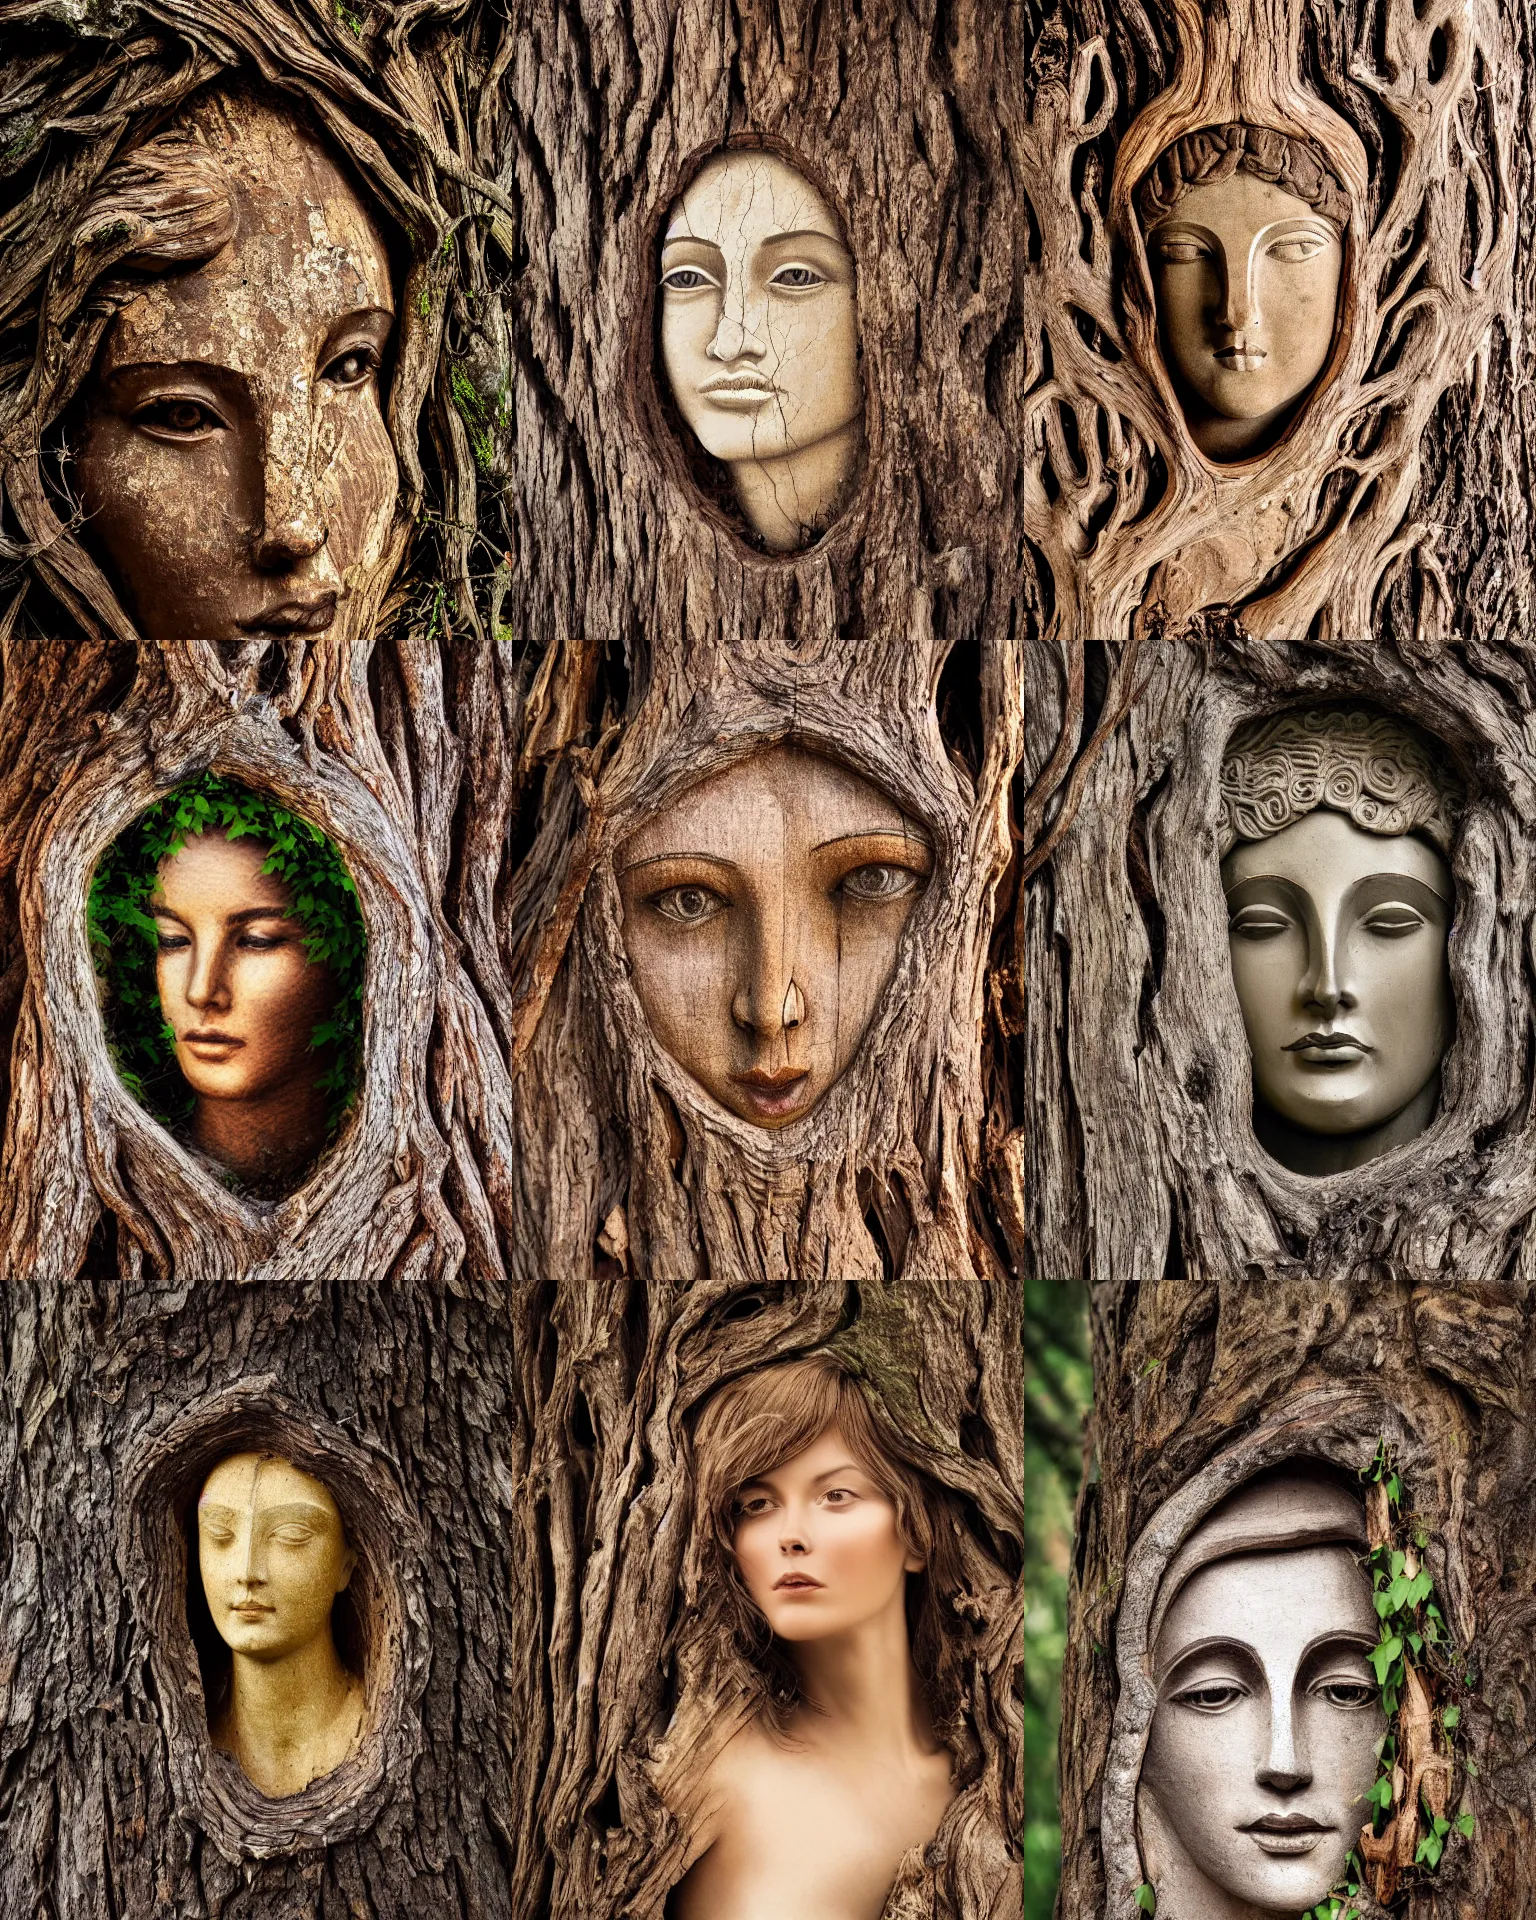 Prompt: a beautiful goddess portrait emerging from the bark of an ancient tree, vines and cracked wood